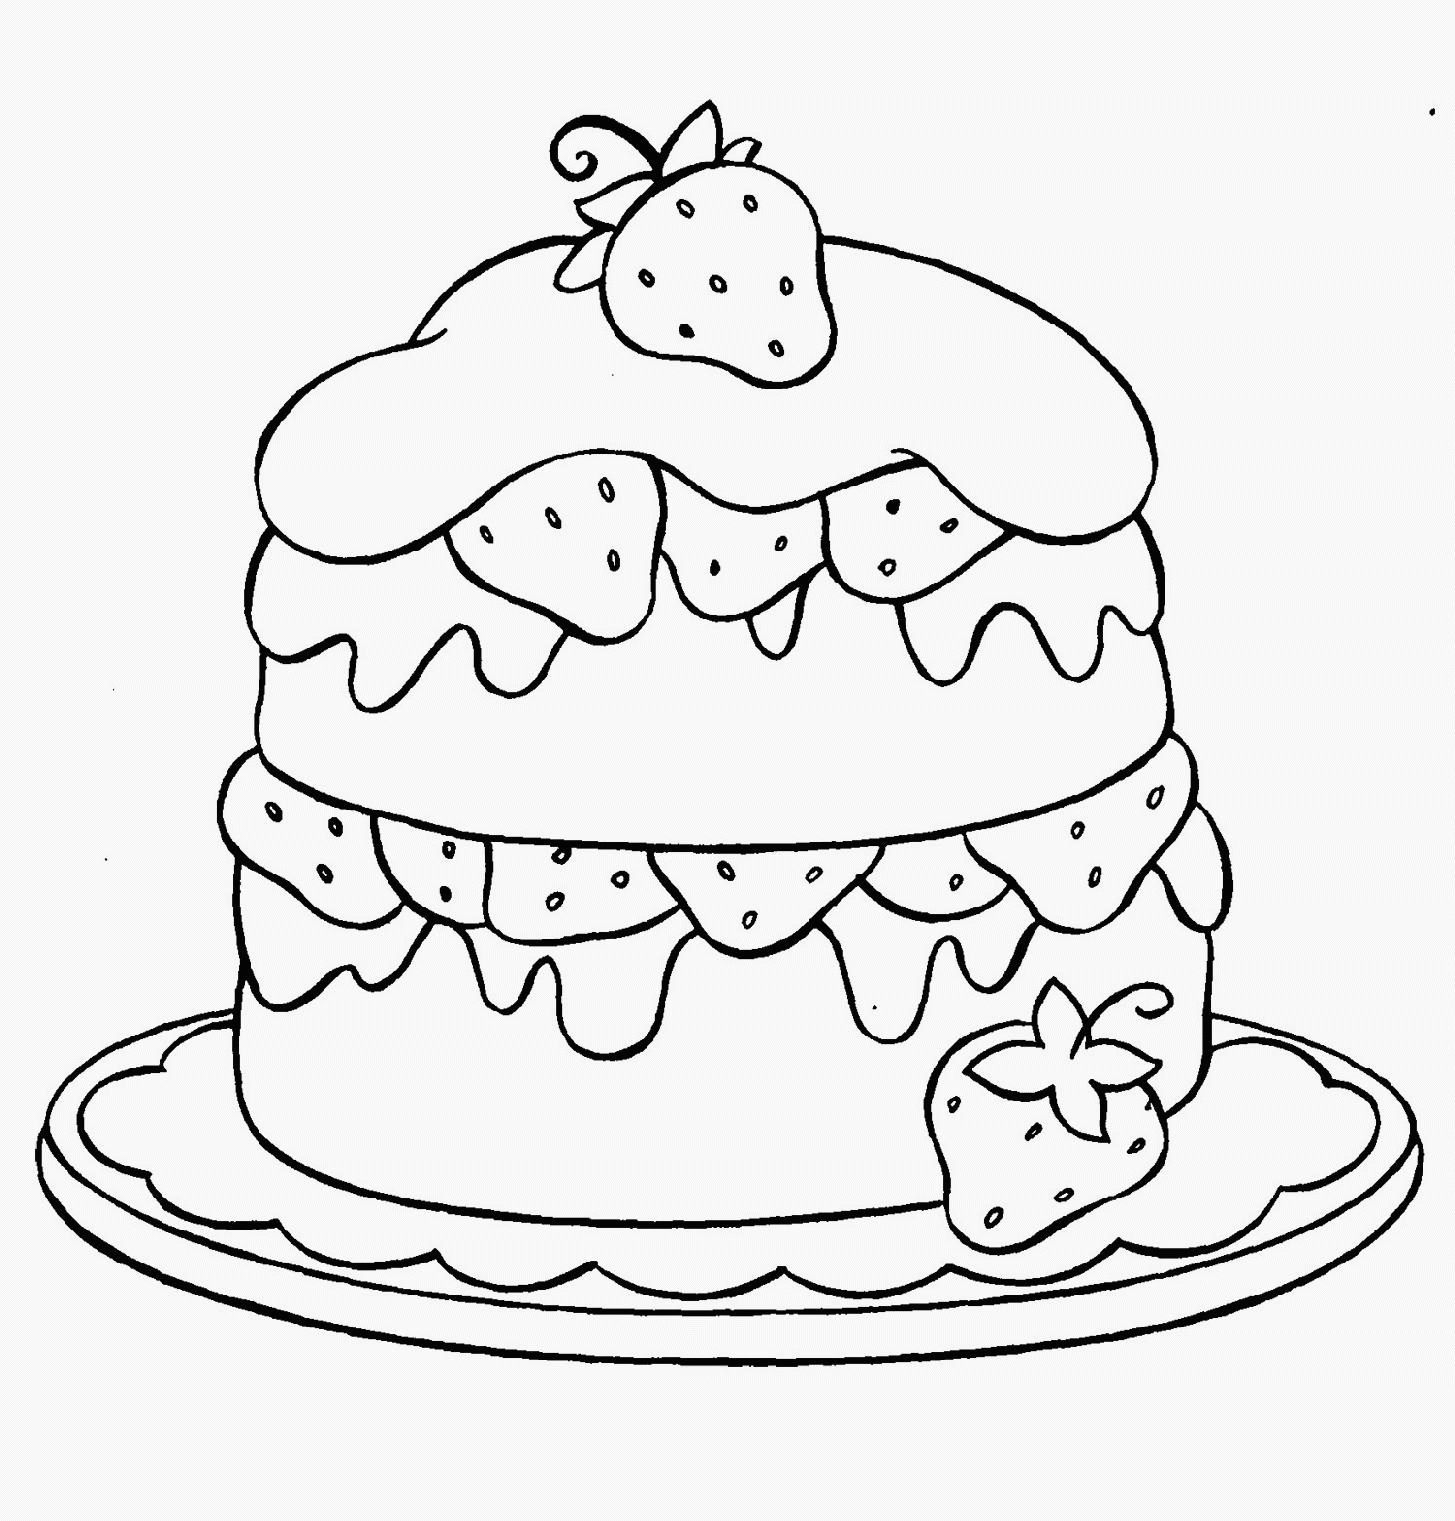 Document Free Printable Cupcake Coloring Pages For Kids - Widetheme